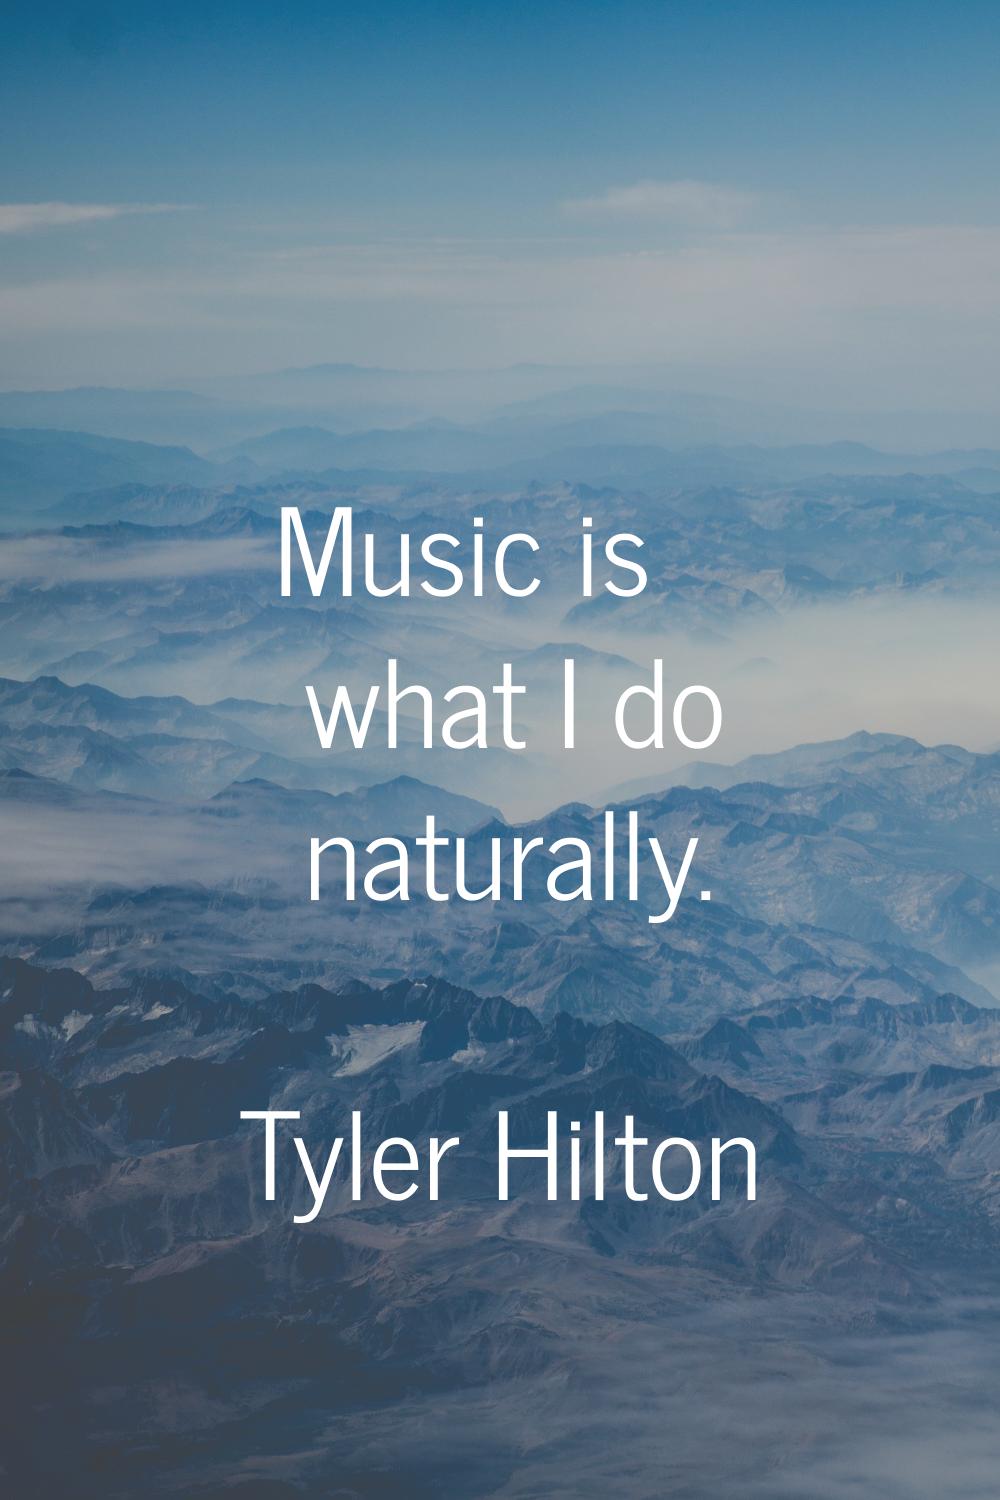 Music is what I do naturally.